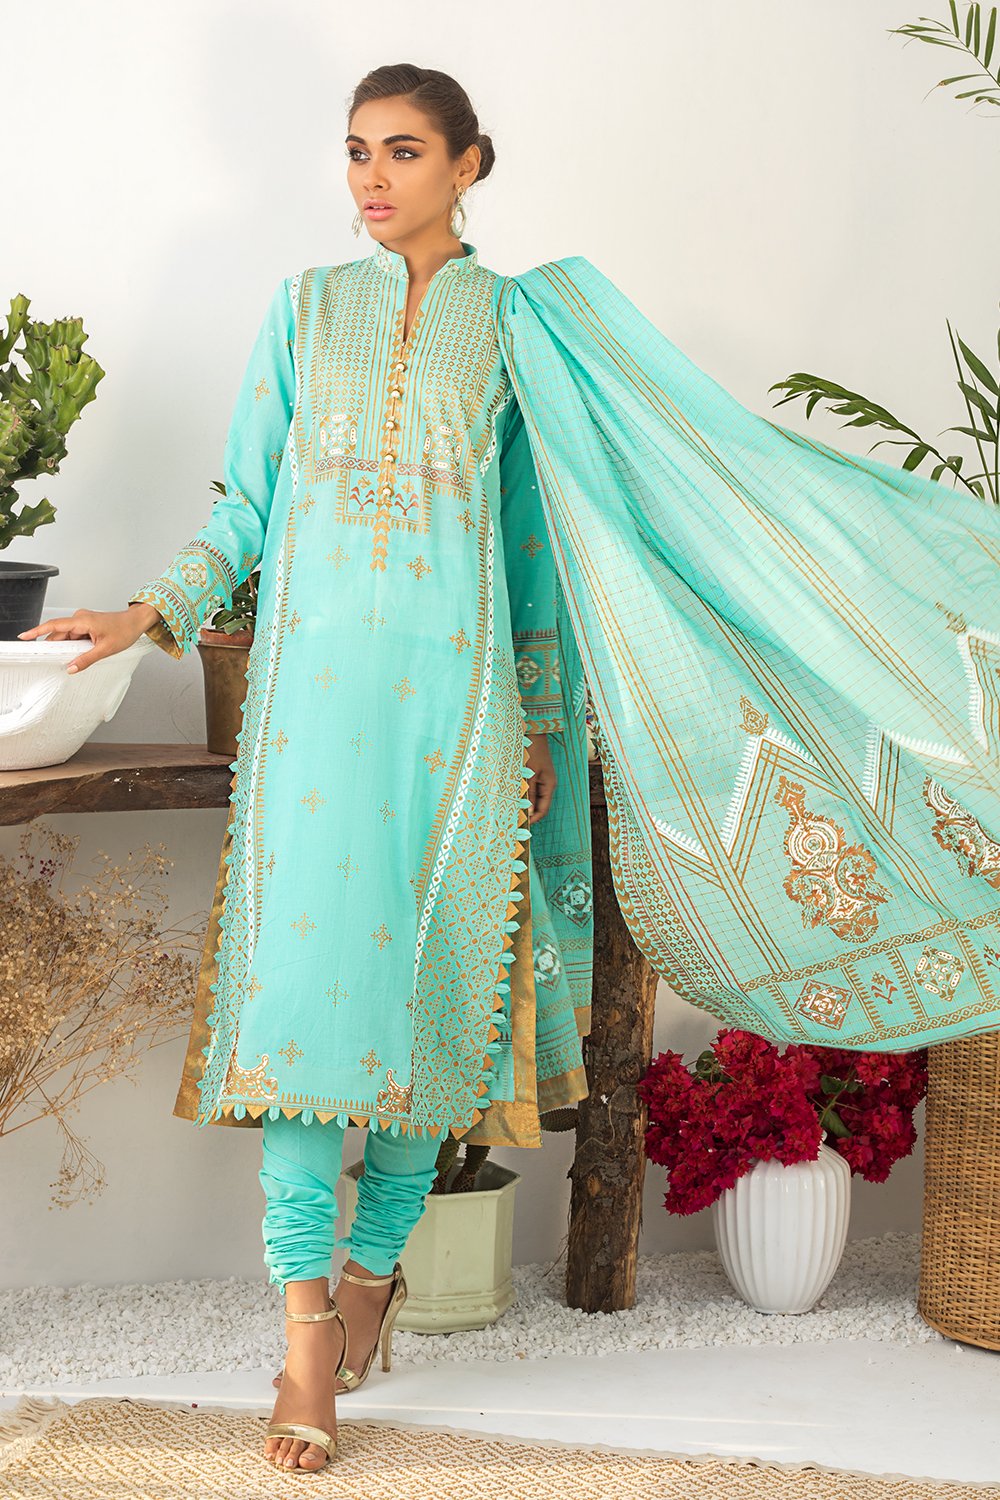 GulAhmed Summer Lawn Collection 2021 Is Now LIVE and Oh-so Fabulous ...